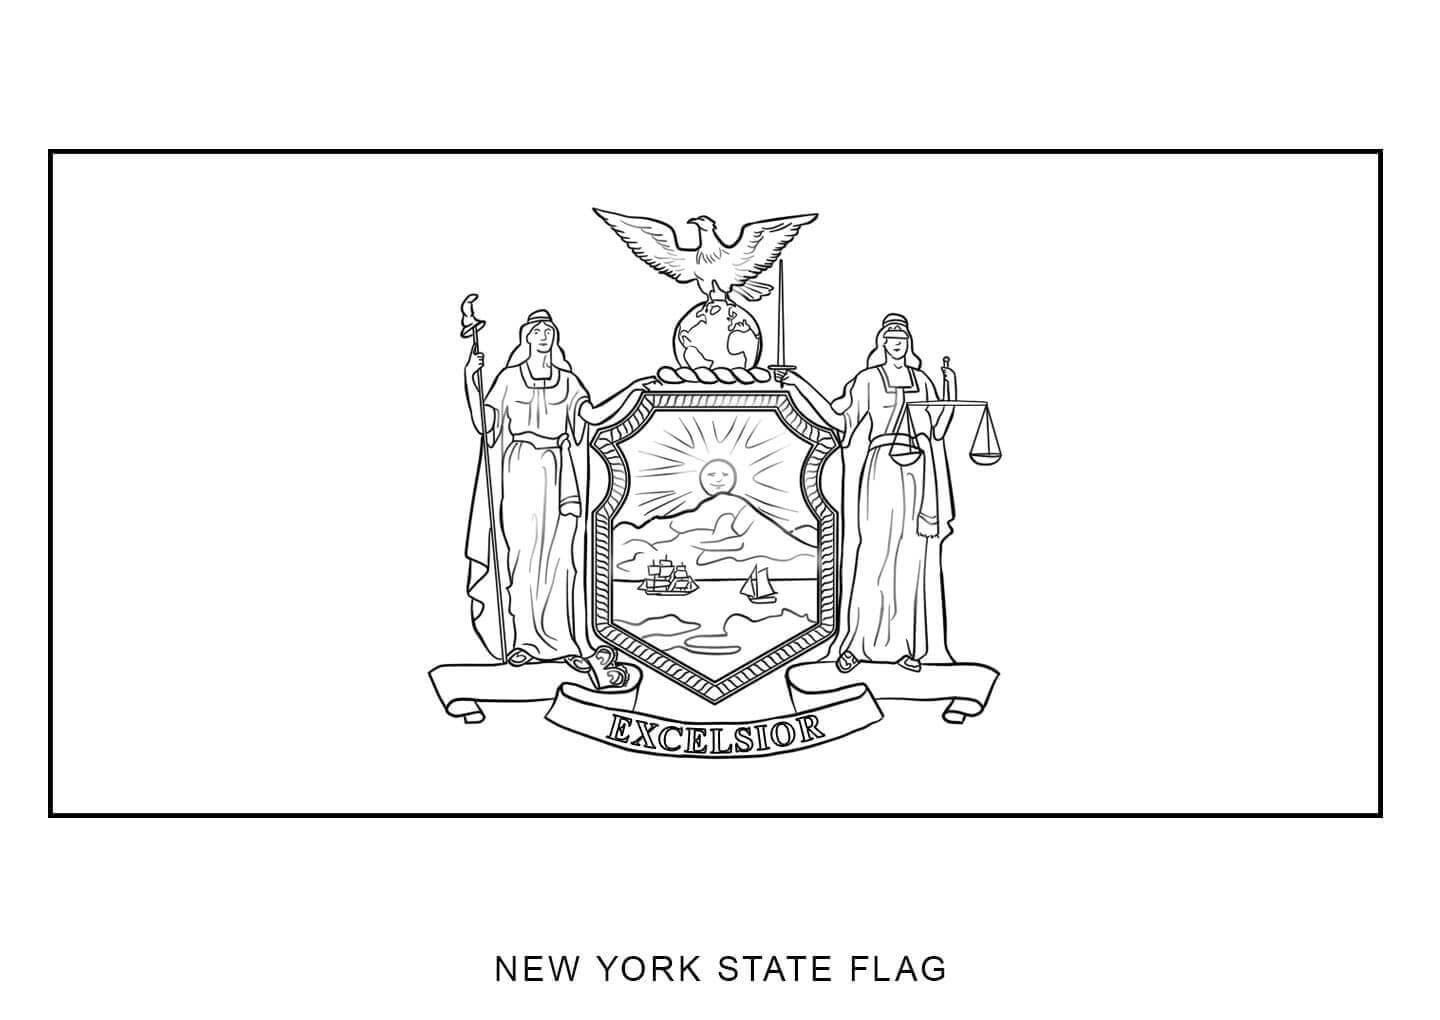 New York State Flag coloring page Download Print or Color Online for